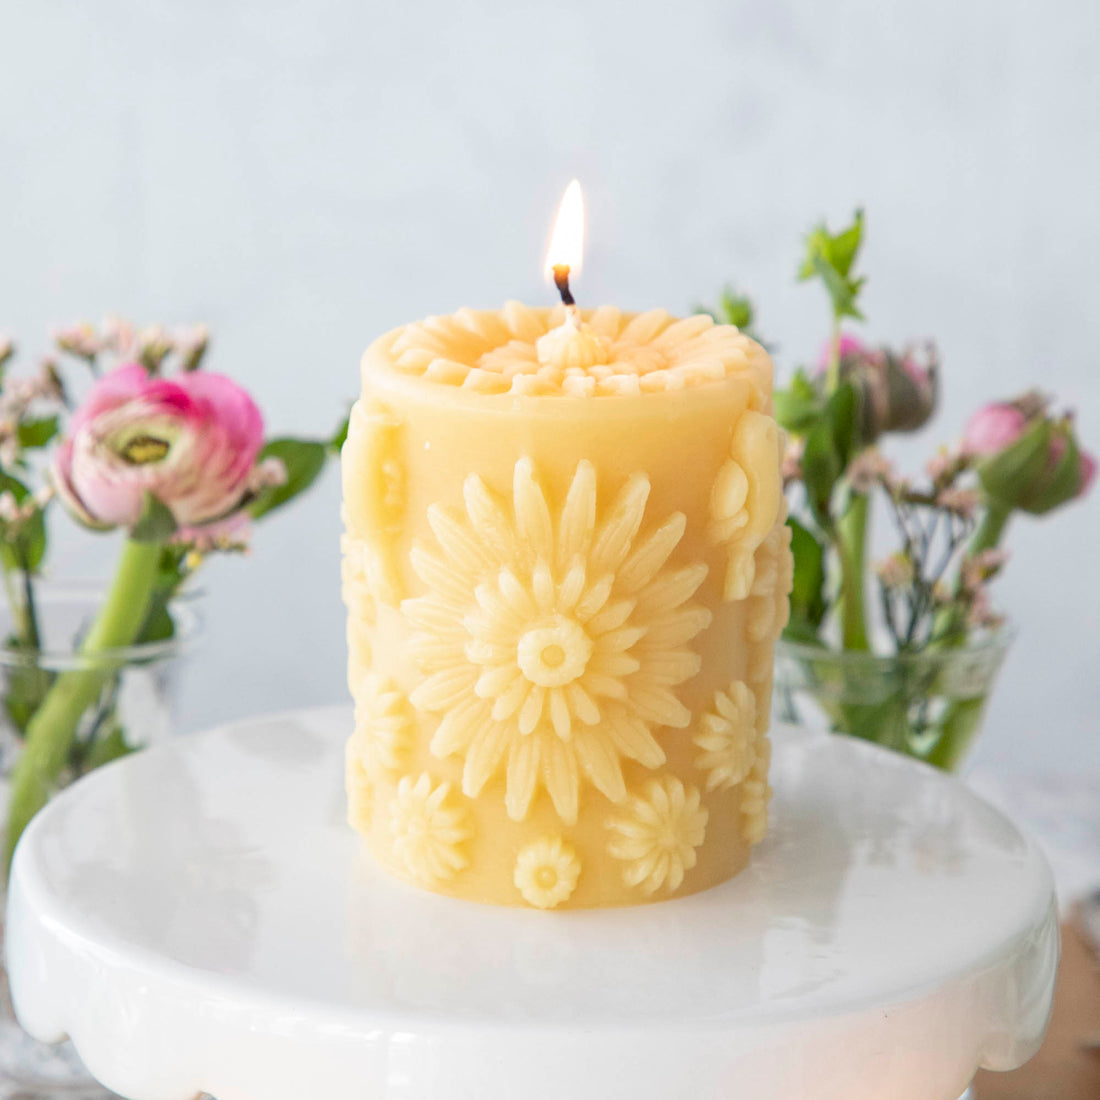 A lit, yellow beeswax pillar candle covered with large and small 3D circular flowers, including a flower on the top surface, resting on a cake stand with pink flowers in the background.